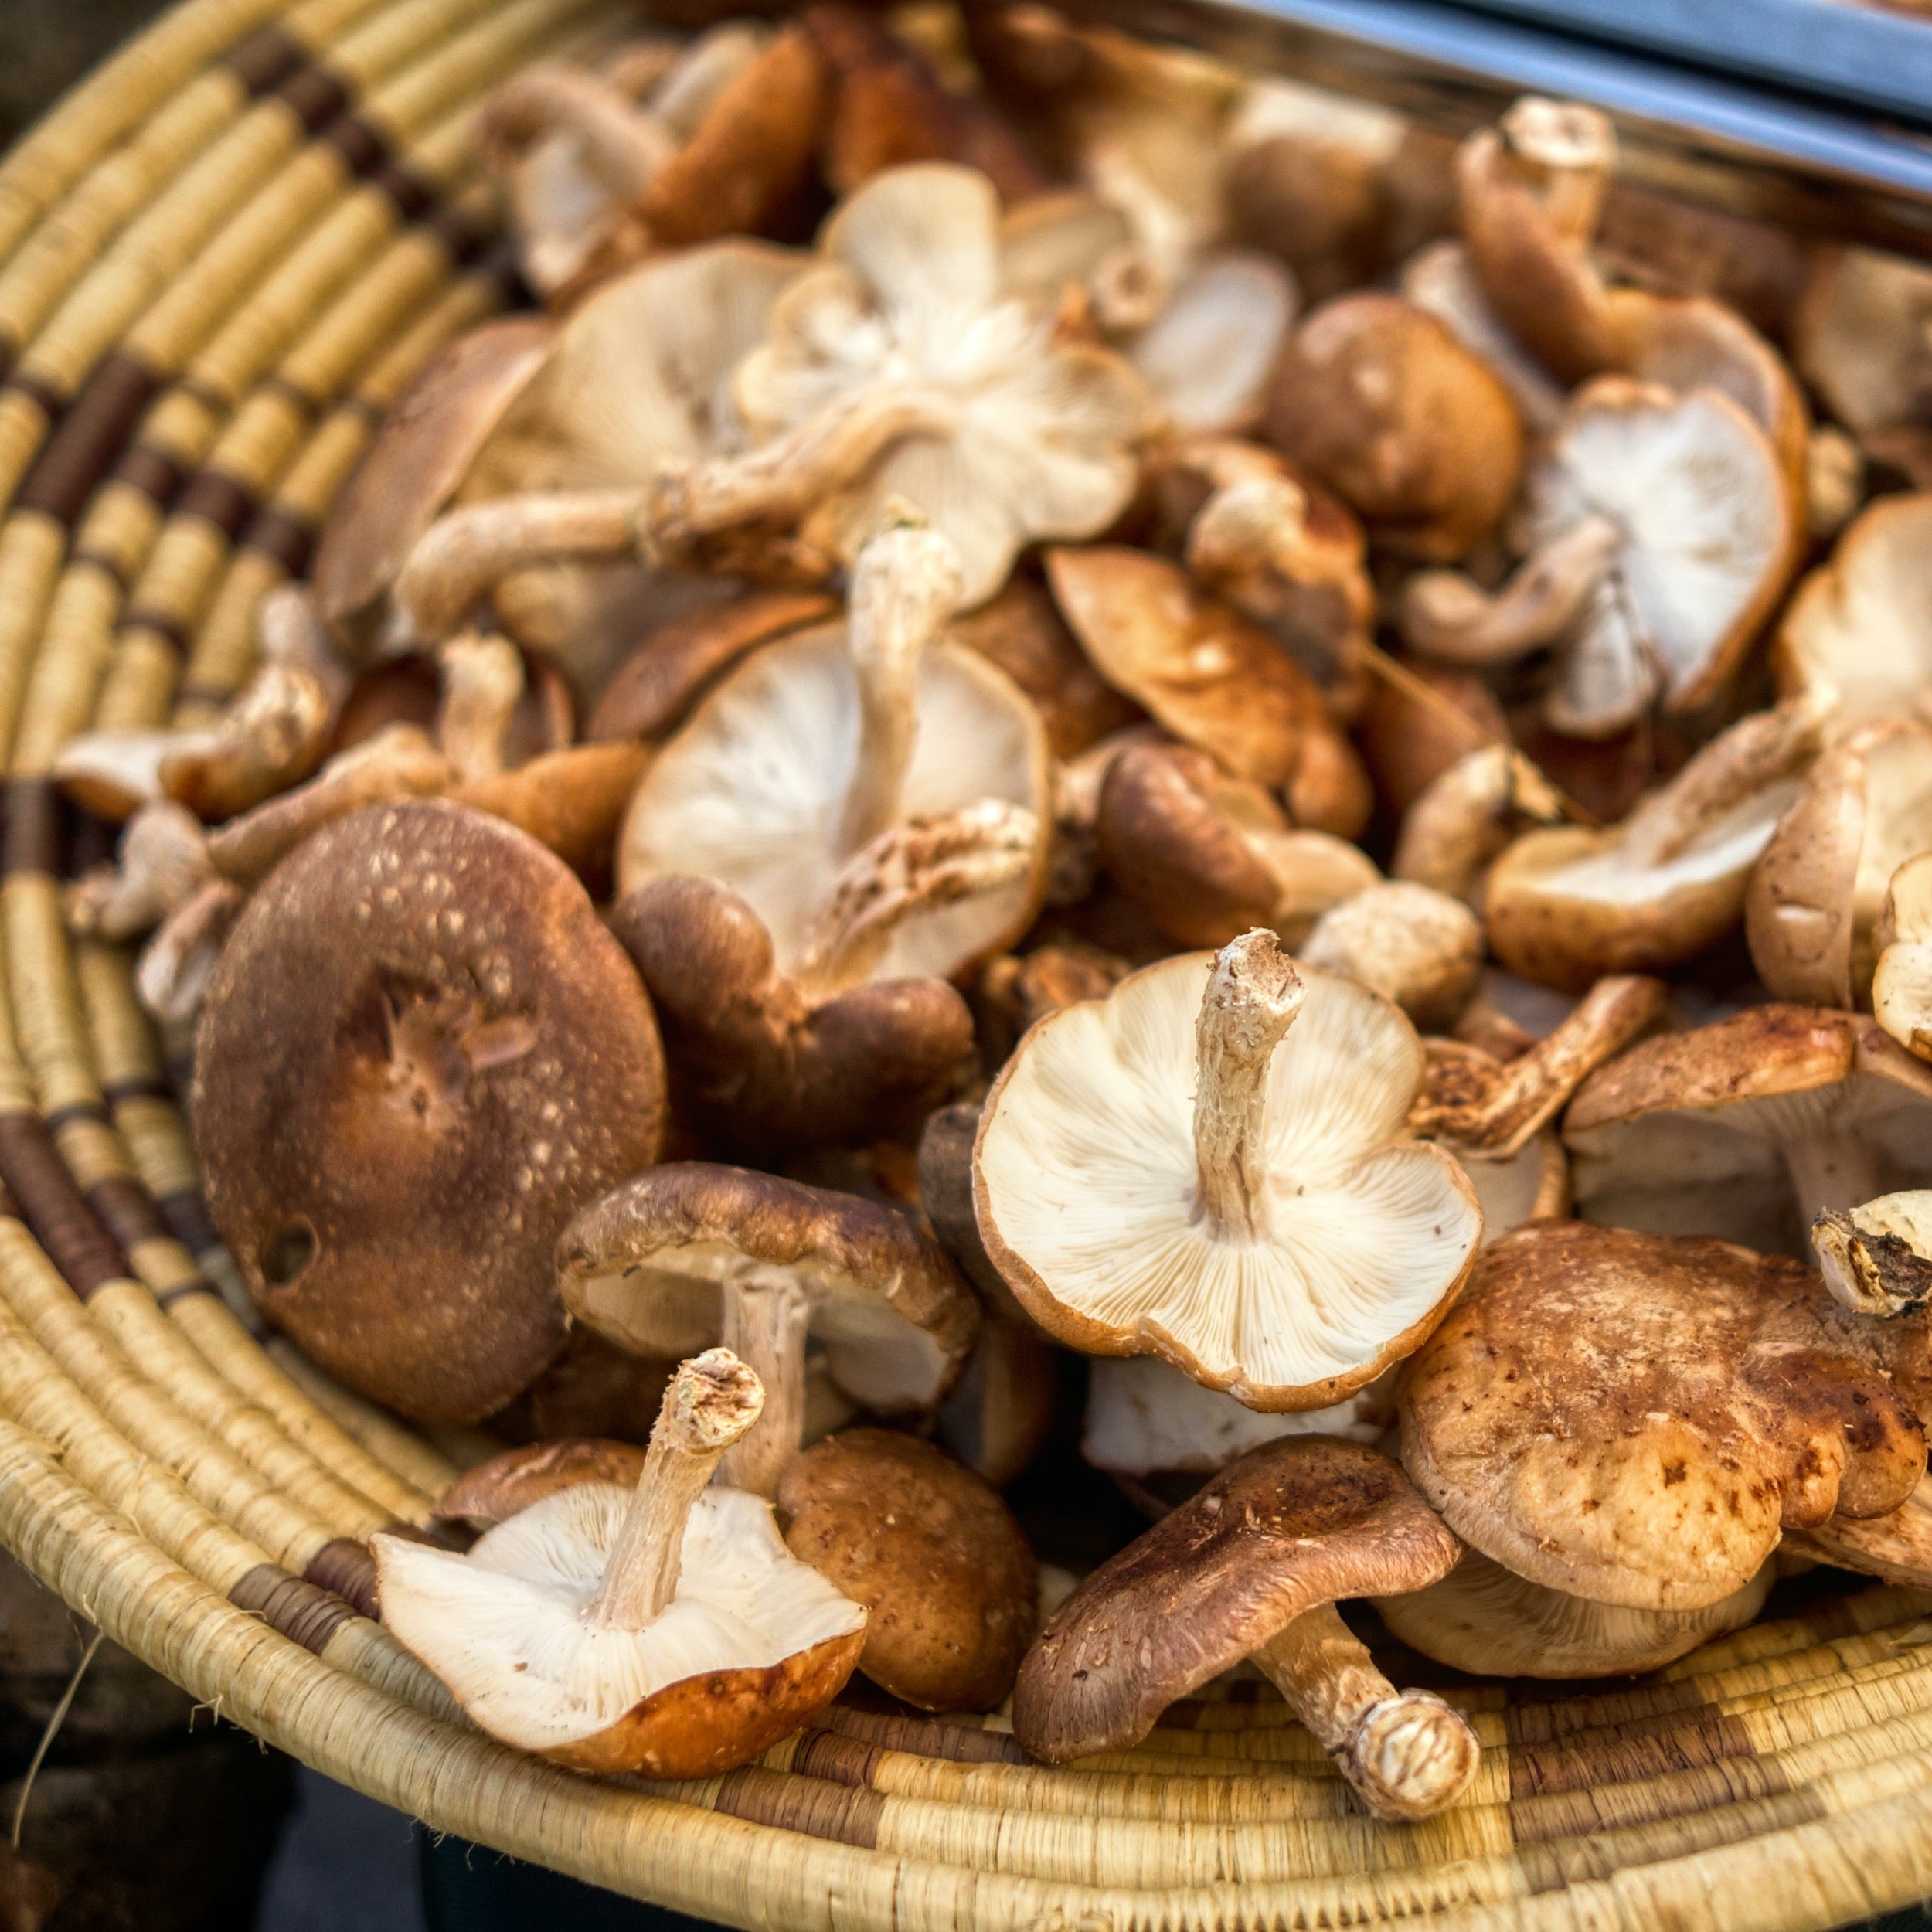 The 10 Biggest Mistakes People Make with Mushrooms and How to Avoid ThemThe 10 Biggest Mistakes People Make with Mushrooms and How to Avoid Them